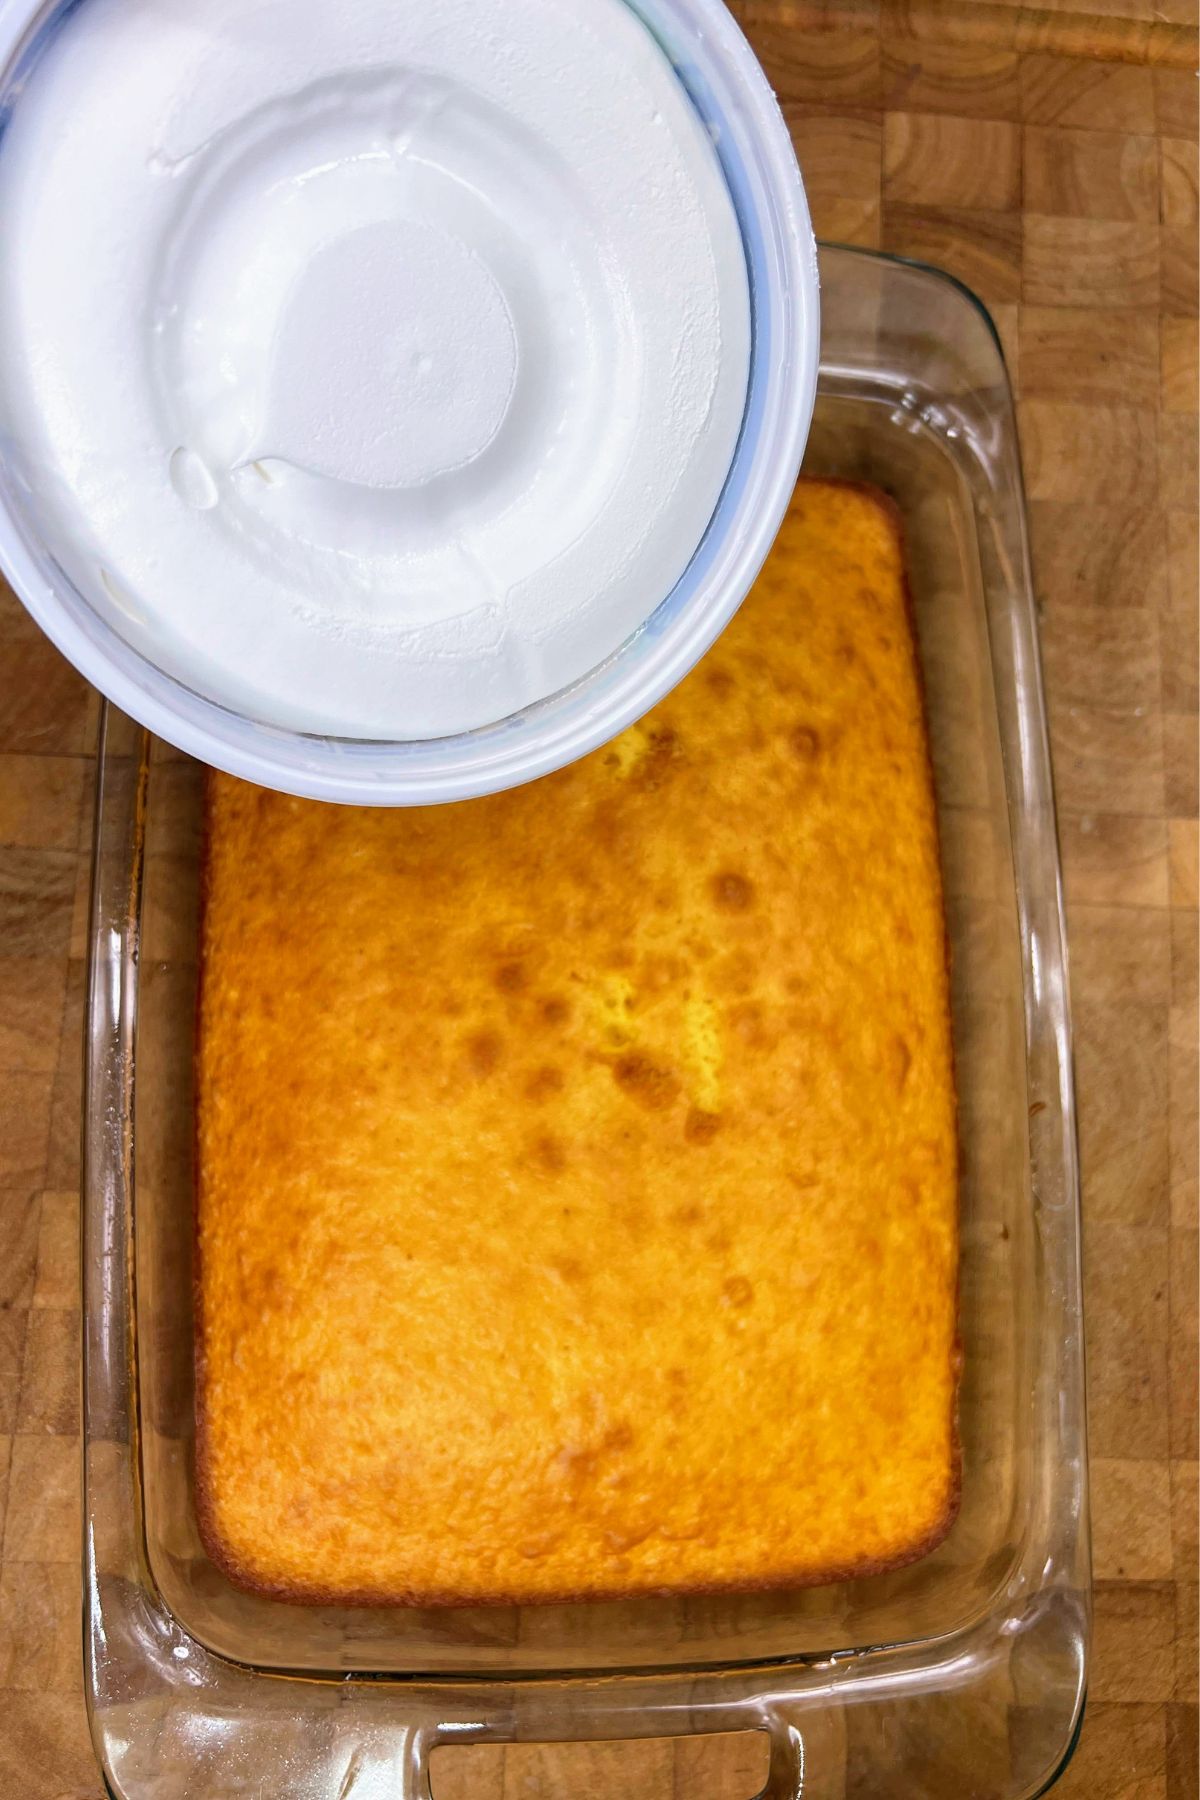 Putting cool whip on baked yellow cake.